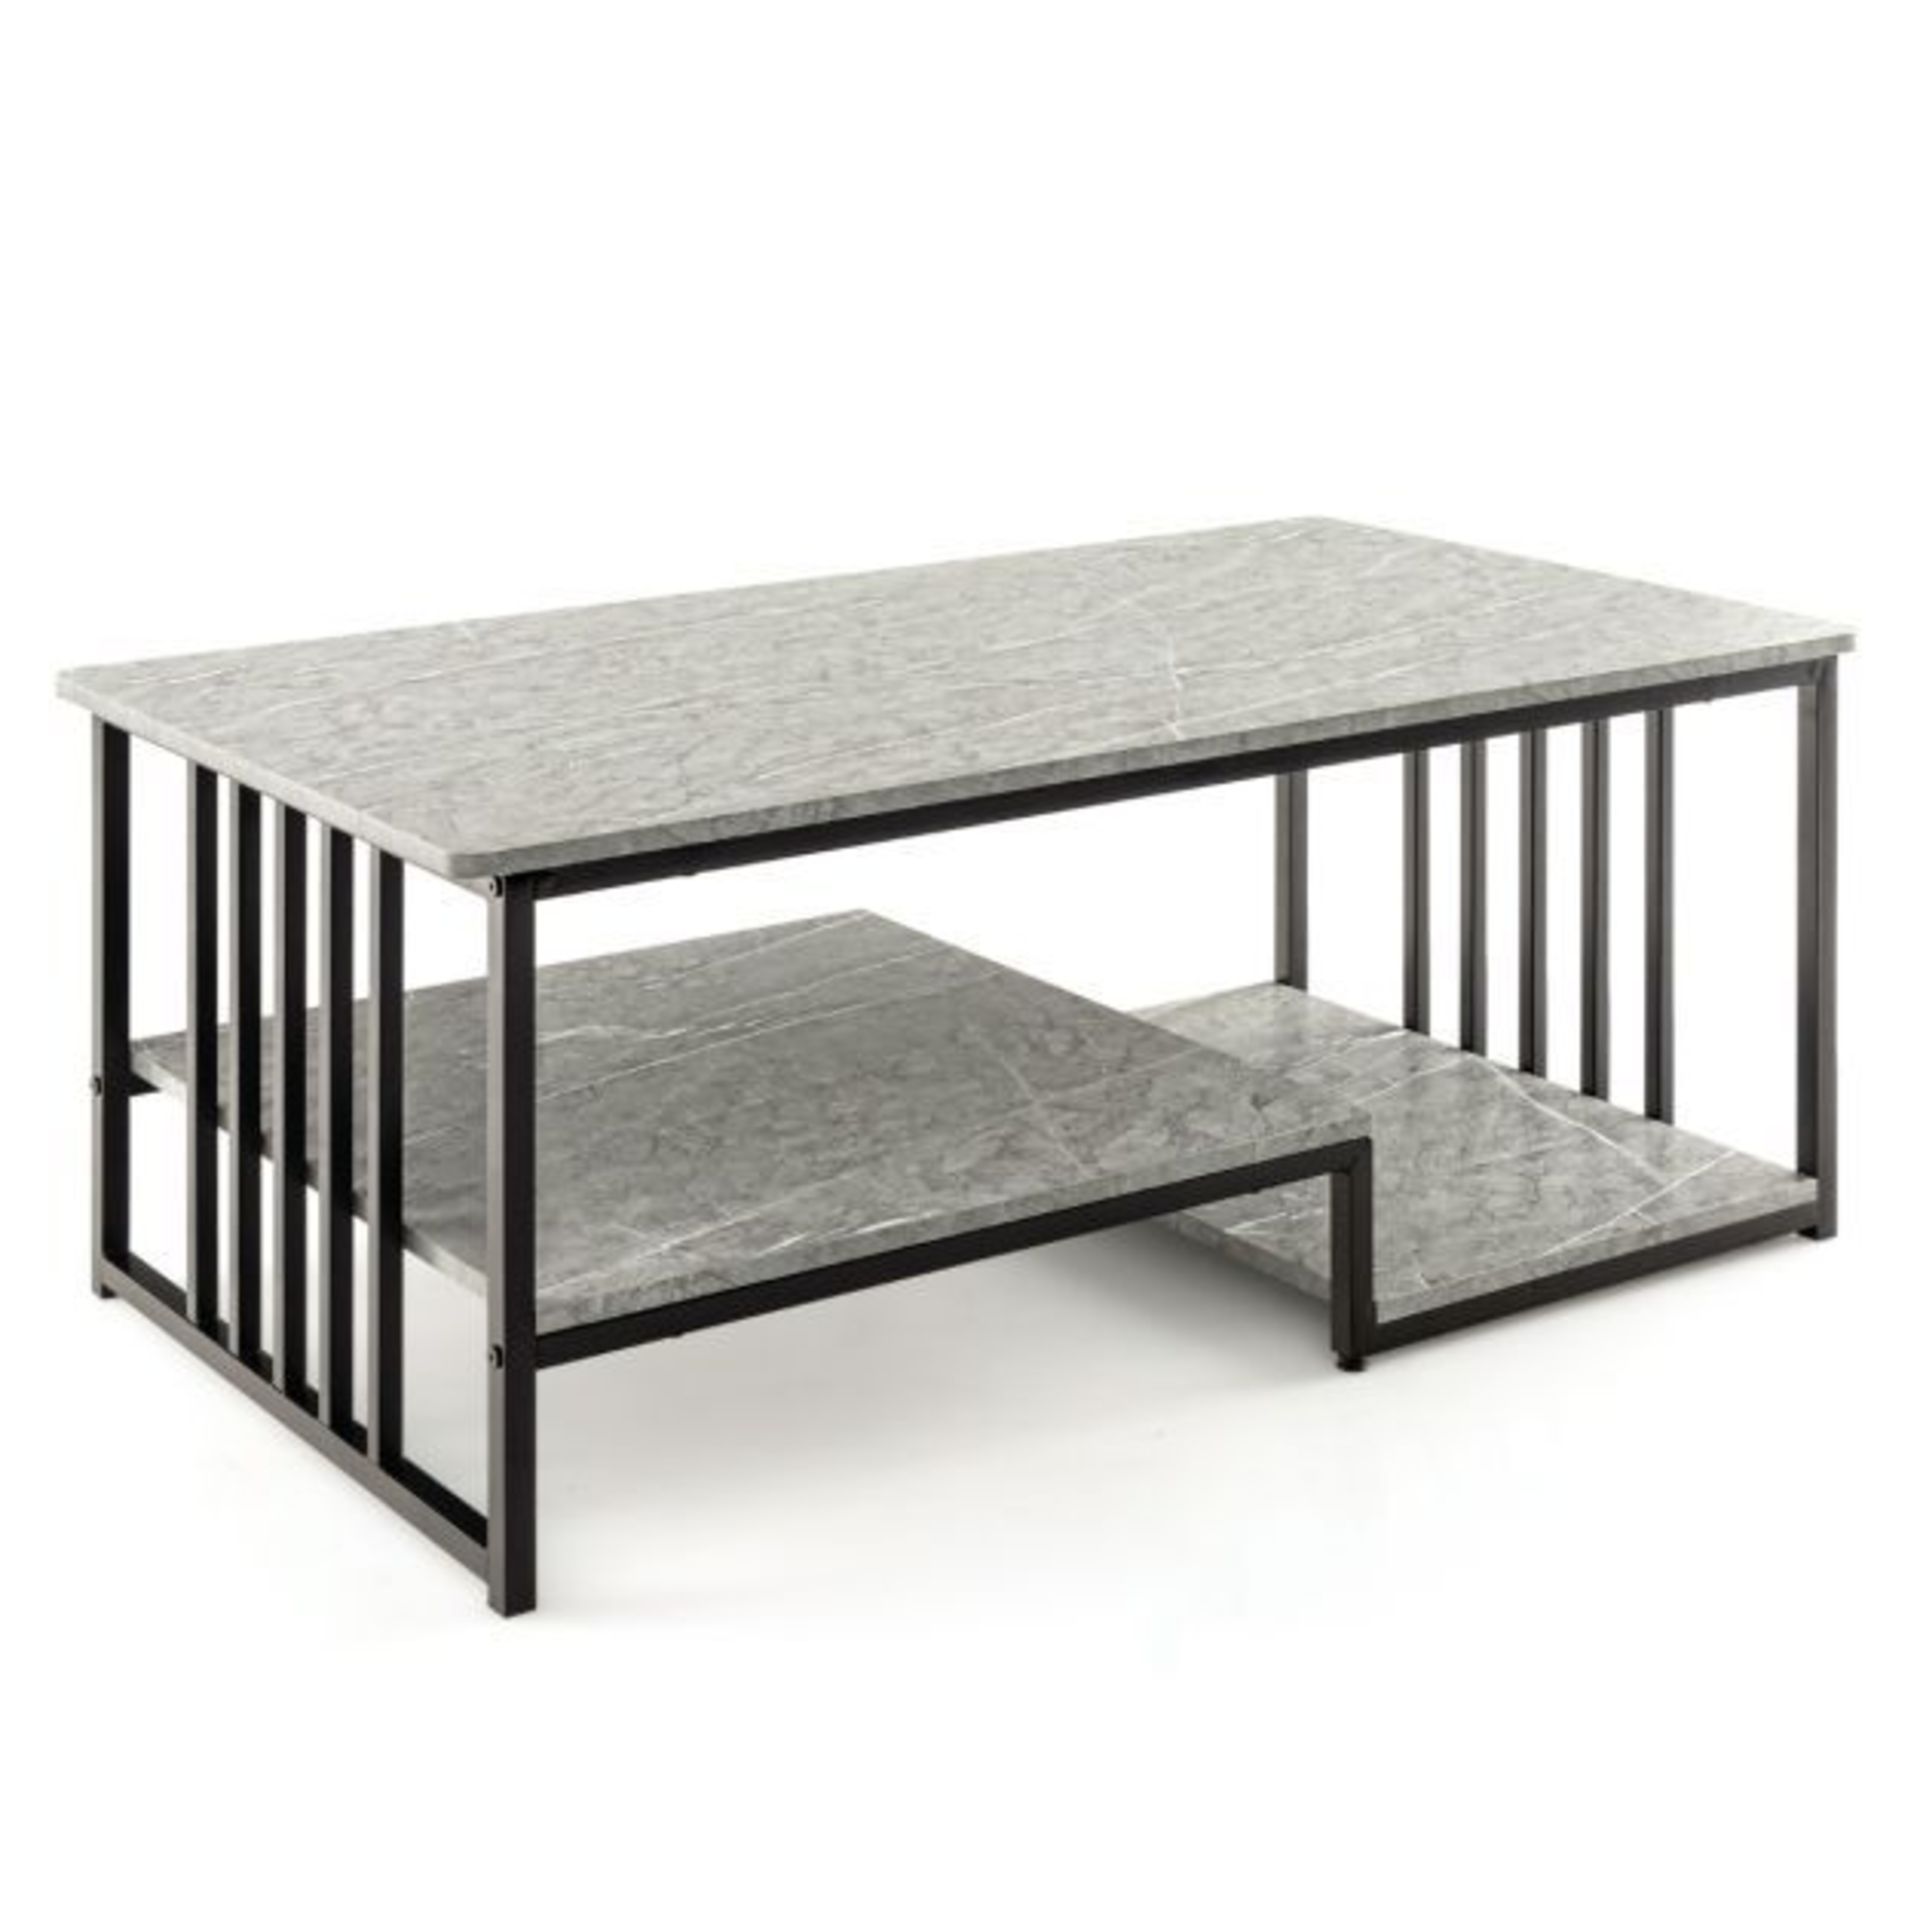 Faux Marble Coffee Table 2-Tier Rectangular Center Table with Open Storage Shelf Grey Metal Frame. -